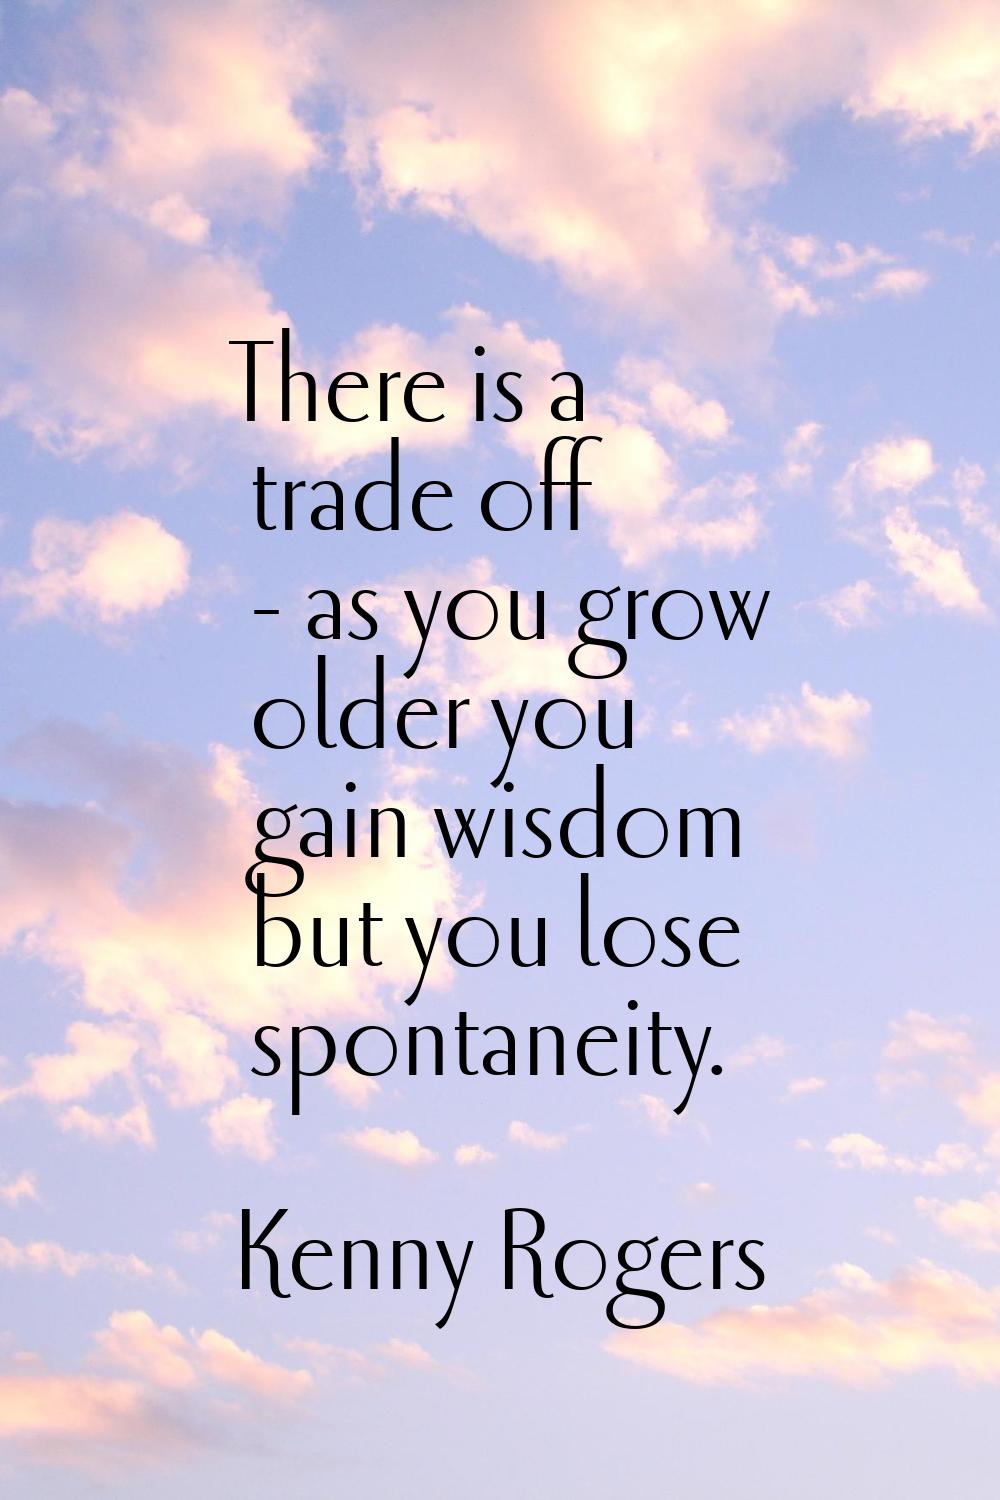 There is a trade off - as you grow older you gain wisdom but you lose spontaneity.